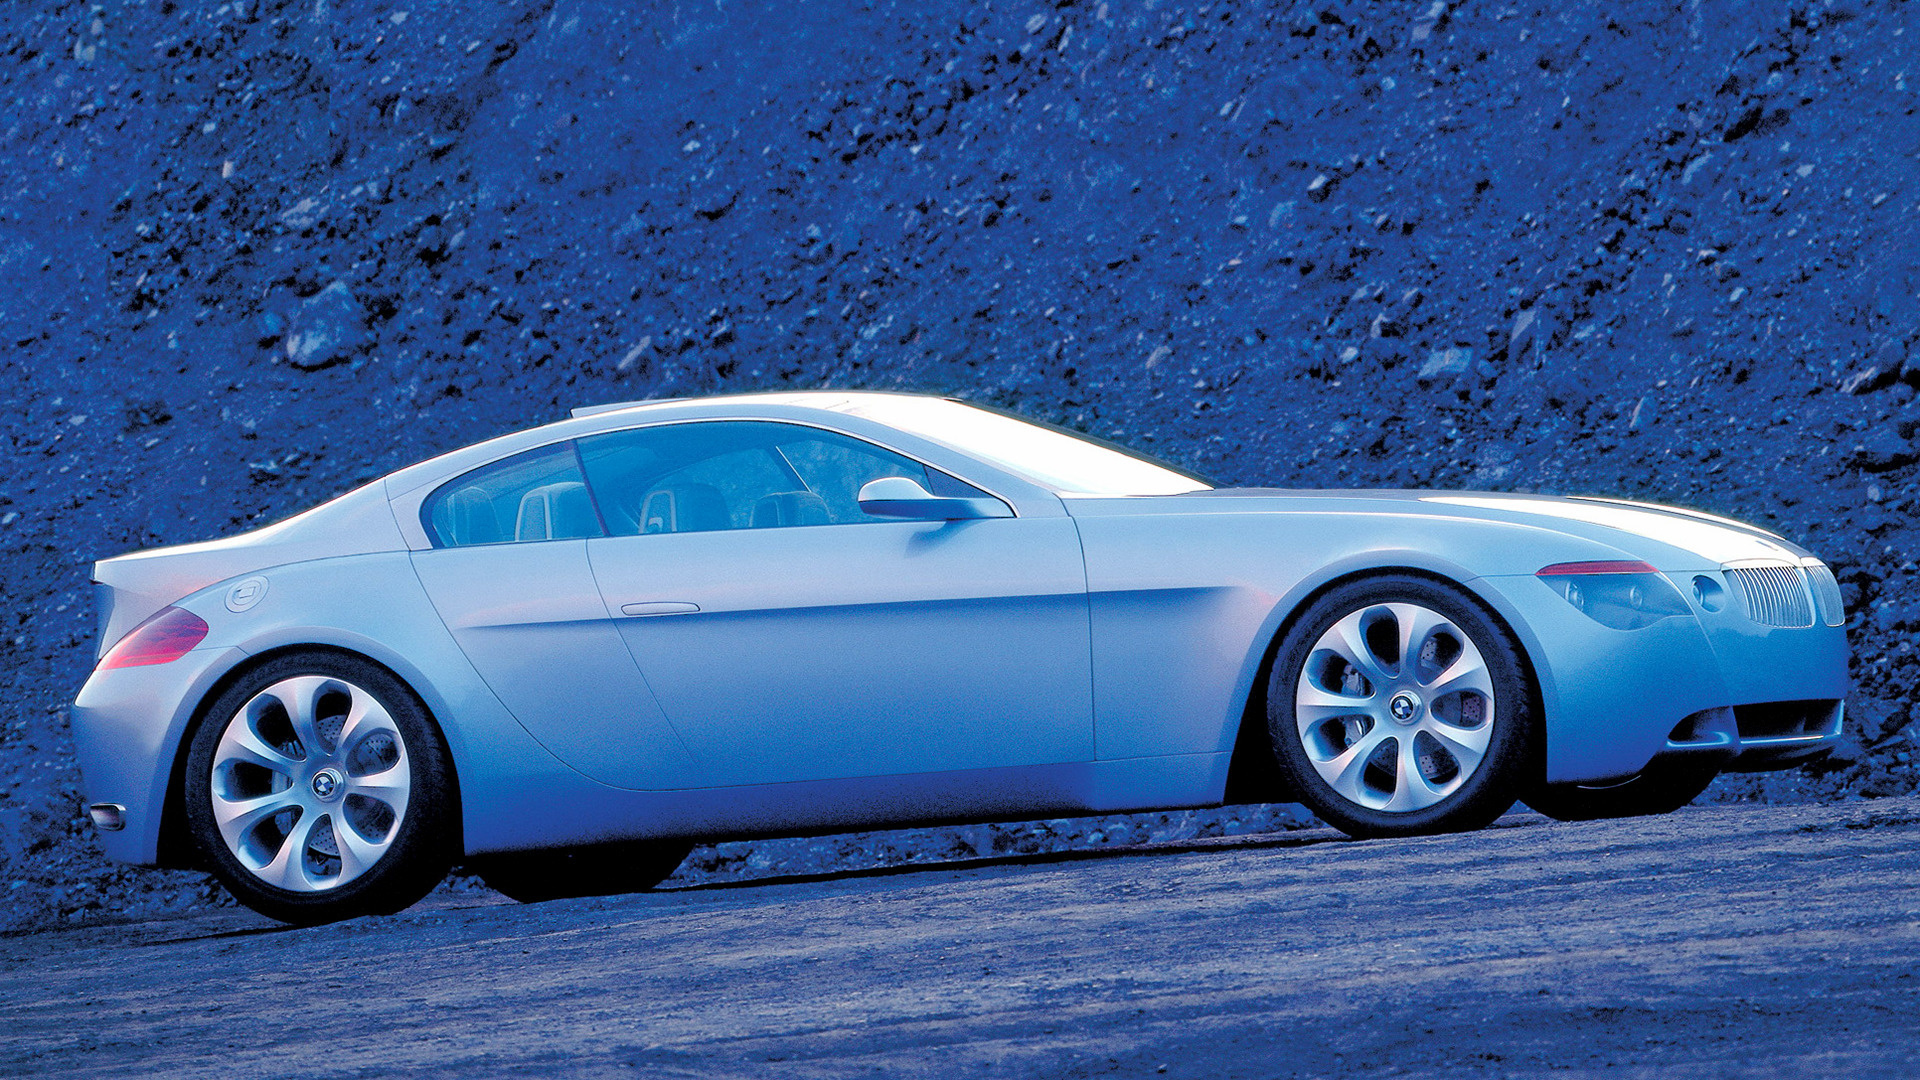 1999 BMW Z9 Gran Turismo Concept Wallpapers and HD